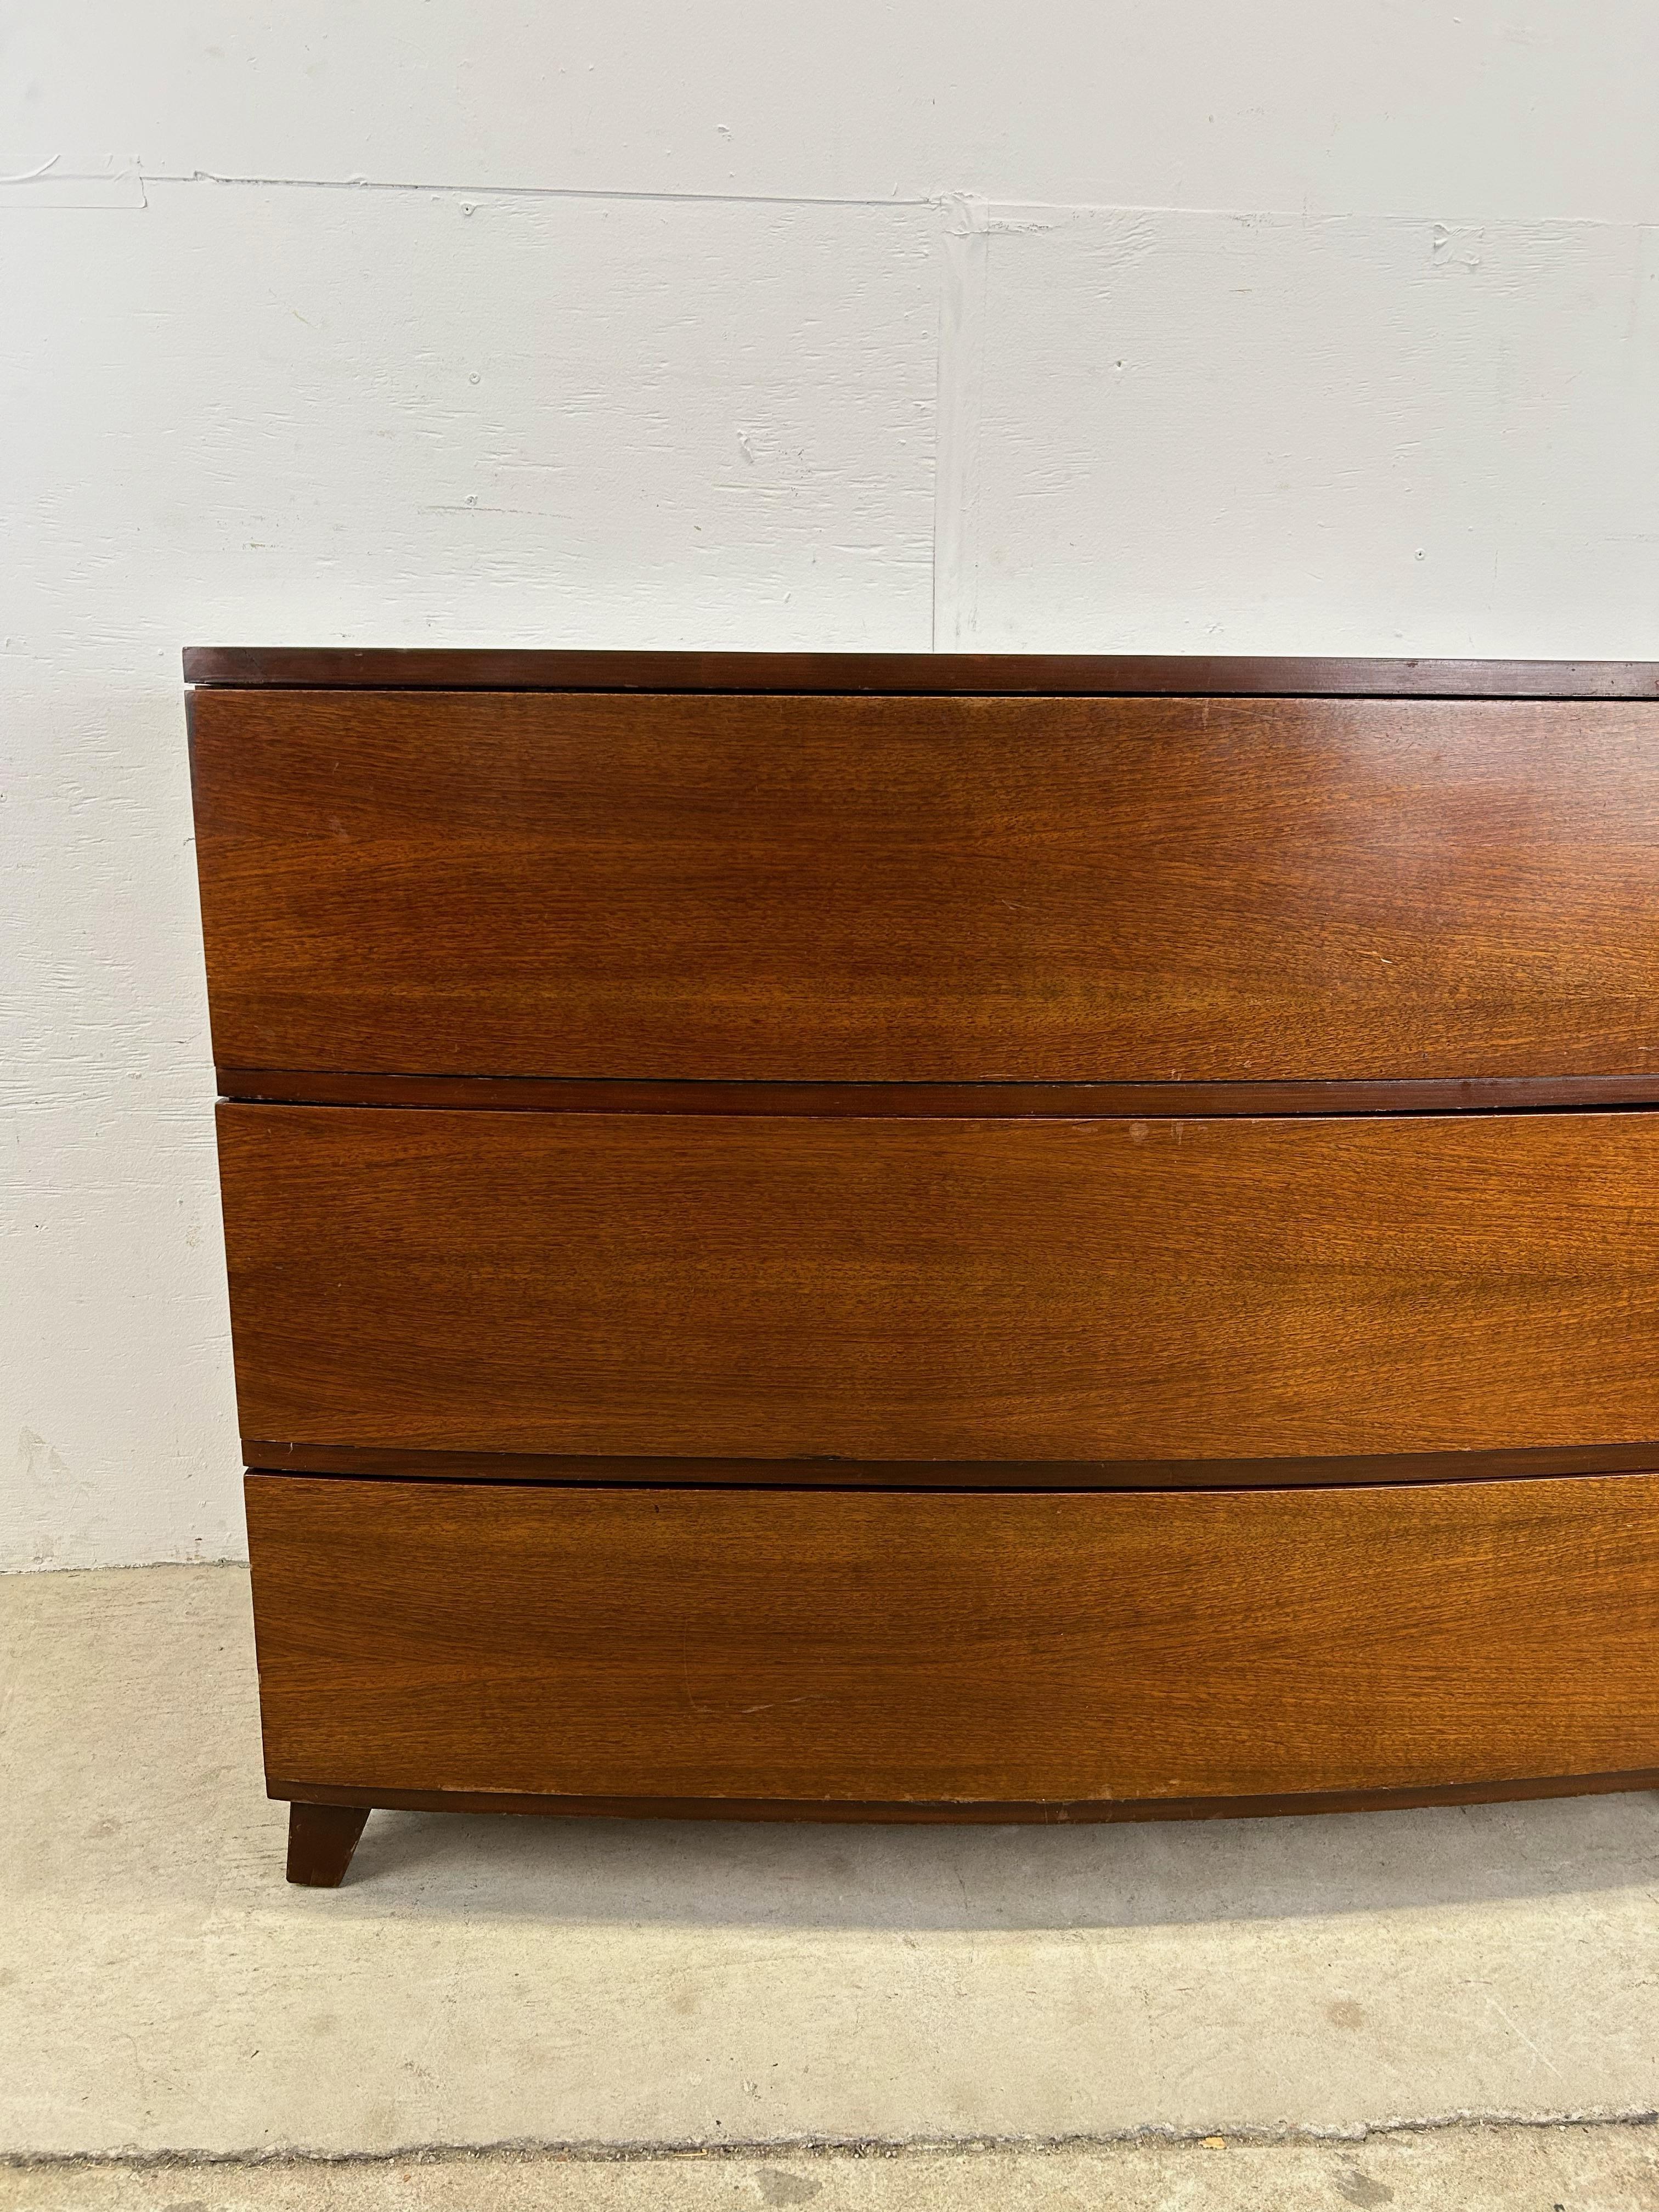 Vintage Art Deco Chest of Drawers In Good Condition For Sale In Freehold, NJ